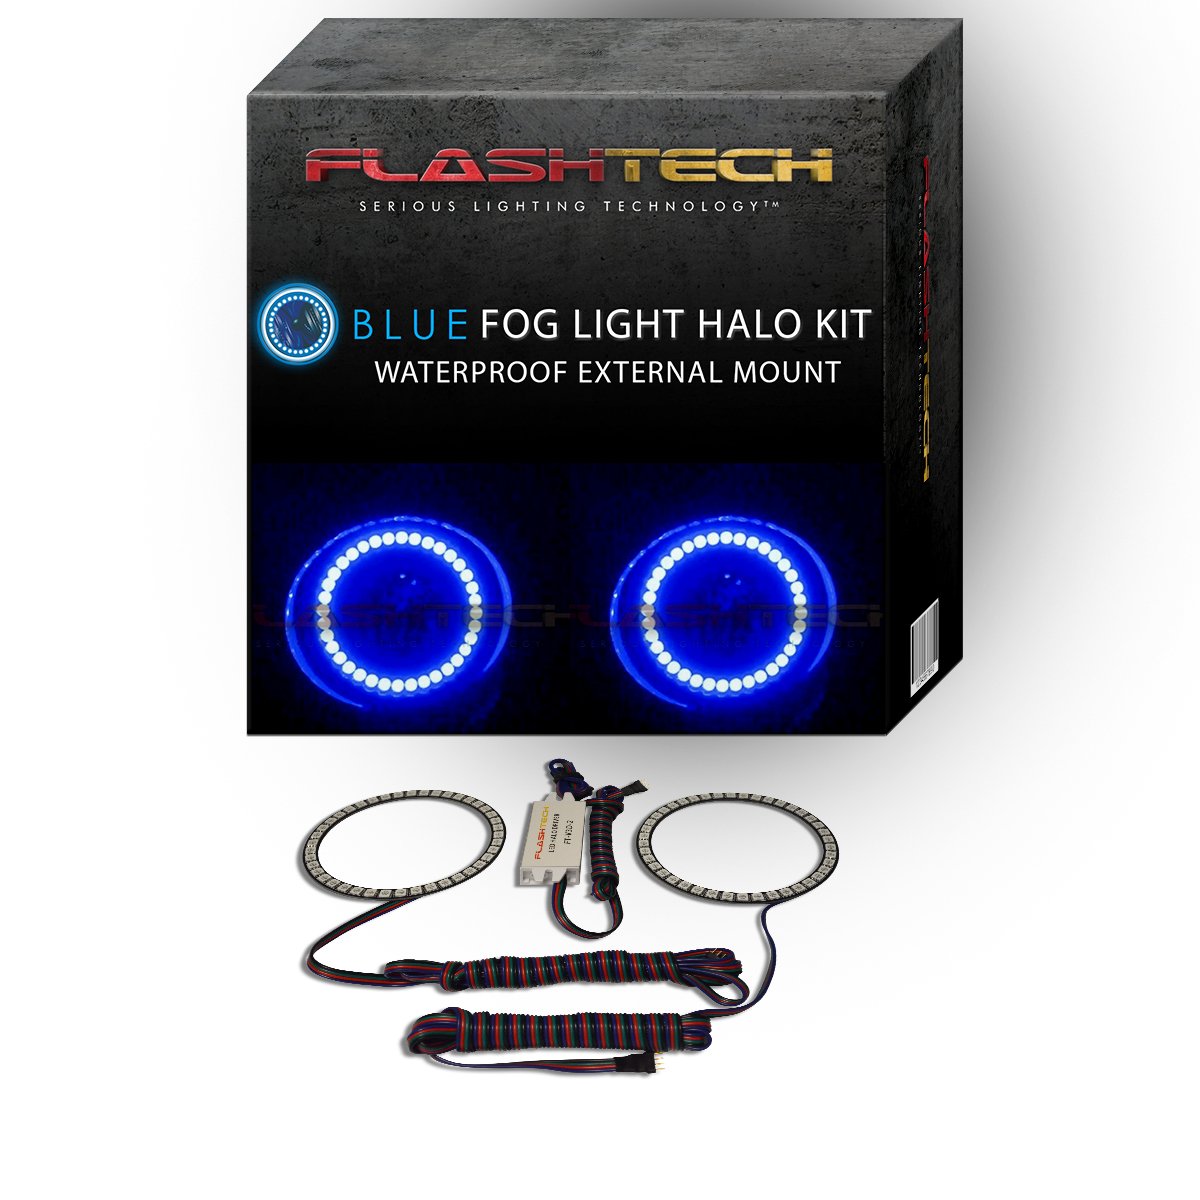 Ford-Transit Connect-2011, 2012, 2013-LED-Halo-Fog Lights-Blue-No Remote-FO-TR1113-BF-WPE